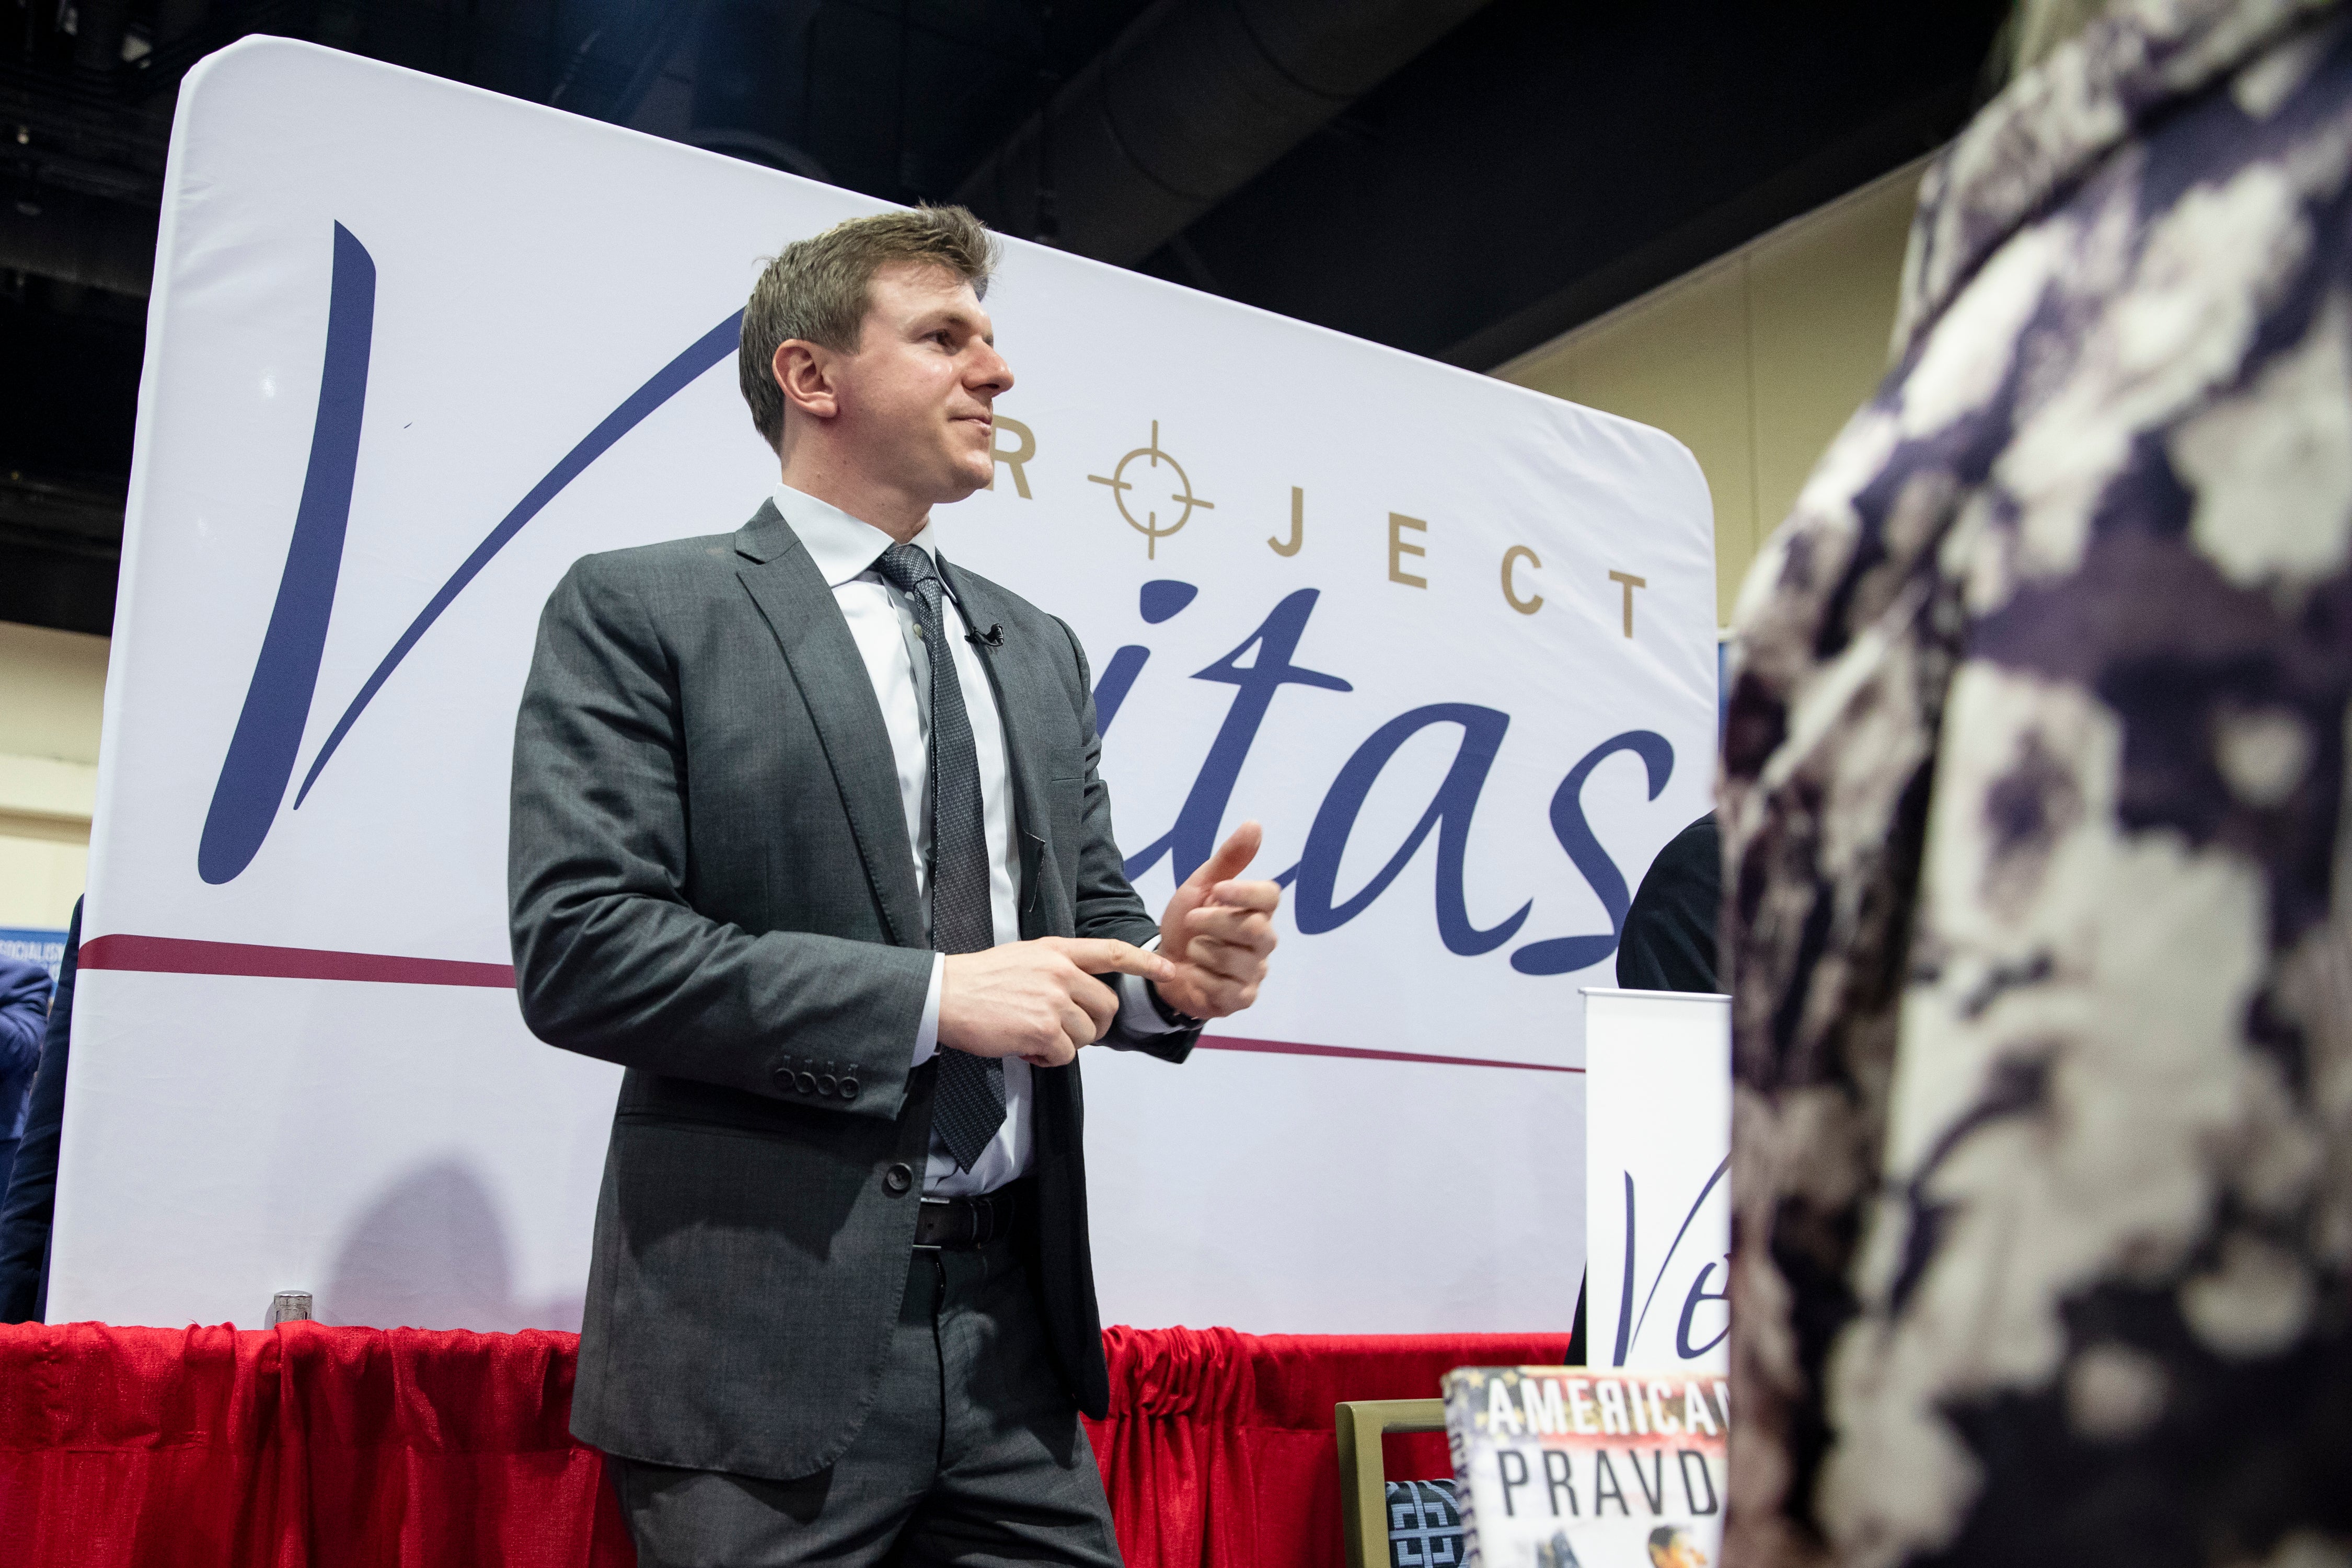 James O'Keefe, an American conservative political activist and founder of Project Veritas, meets with supporters during the Conservative Political Action Conference 2020 (CPAC) hosted by the American Conservative Union on February 28, 2020 in National Harbor, Maryland